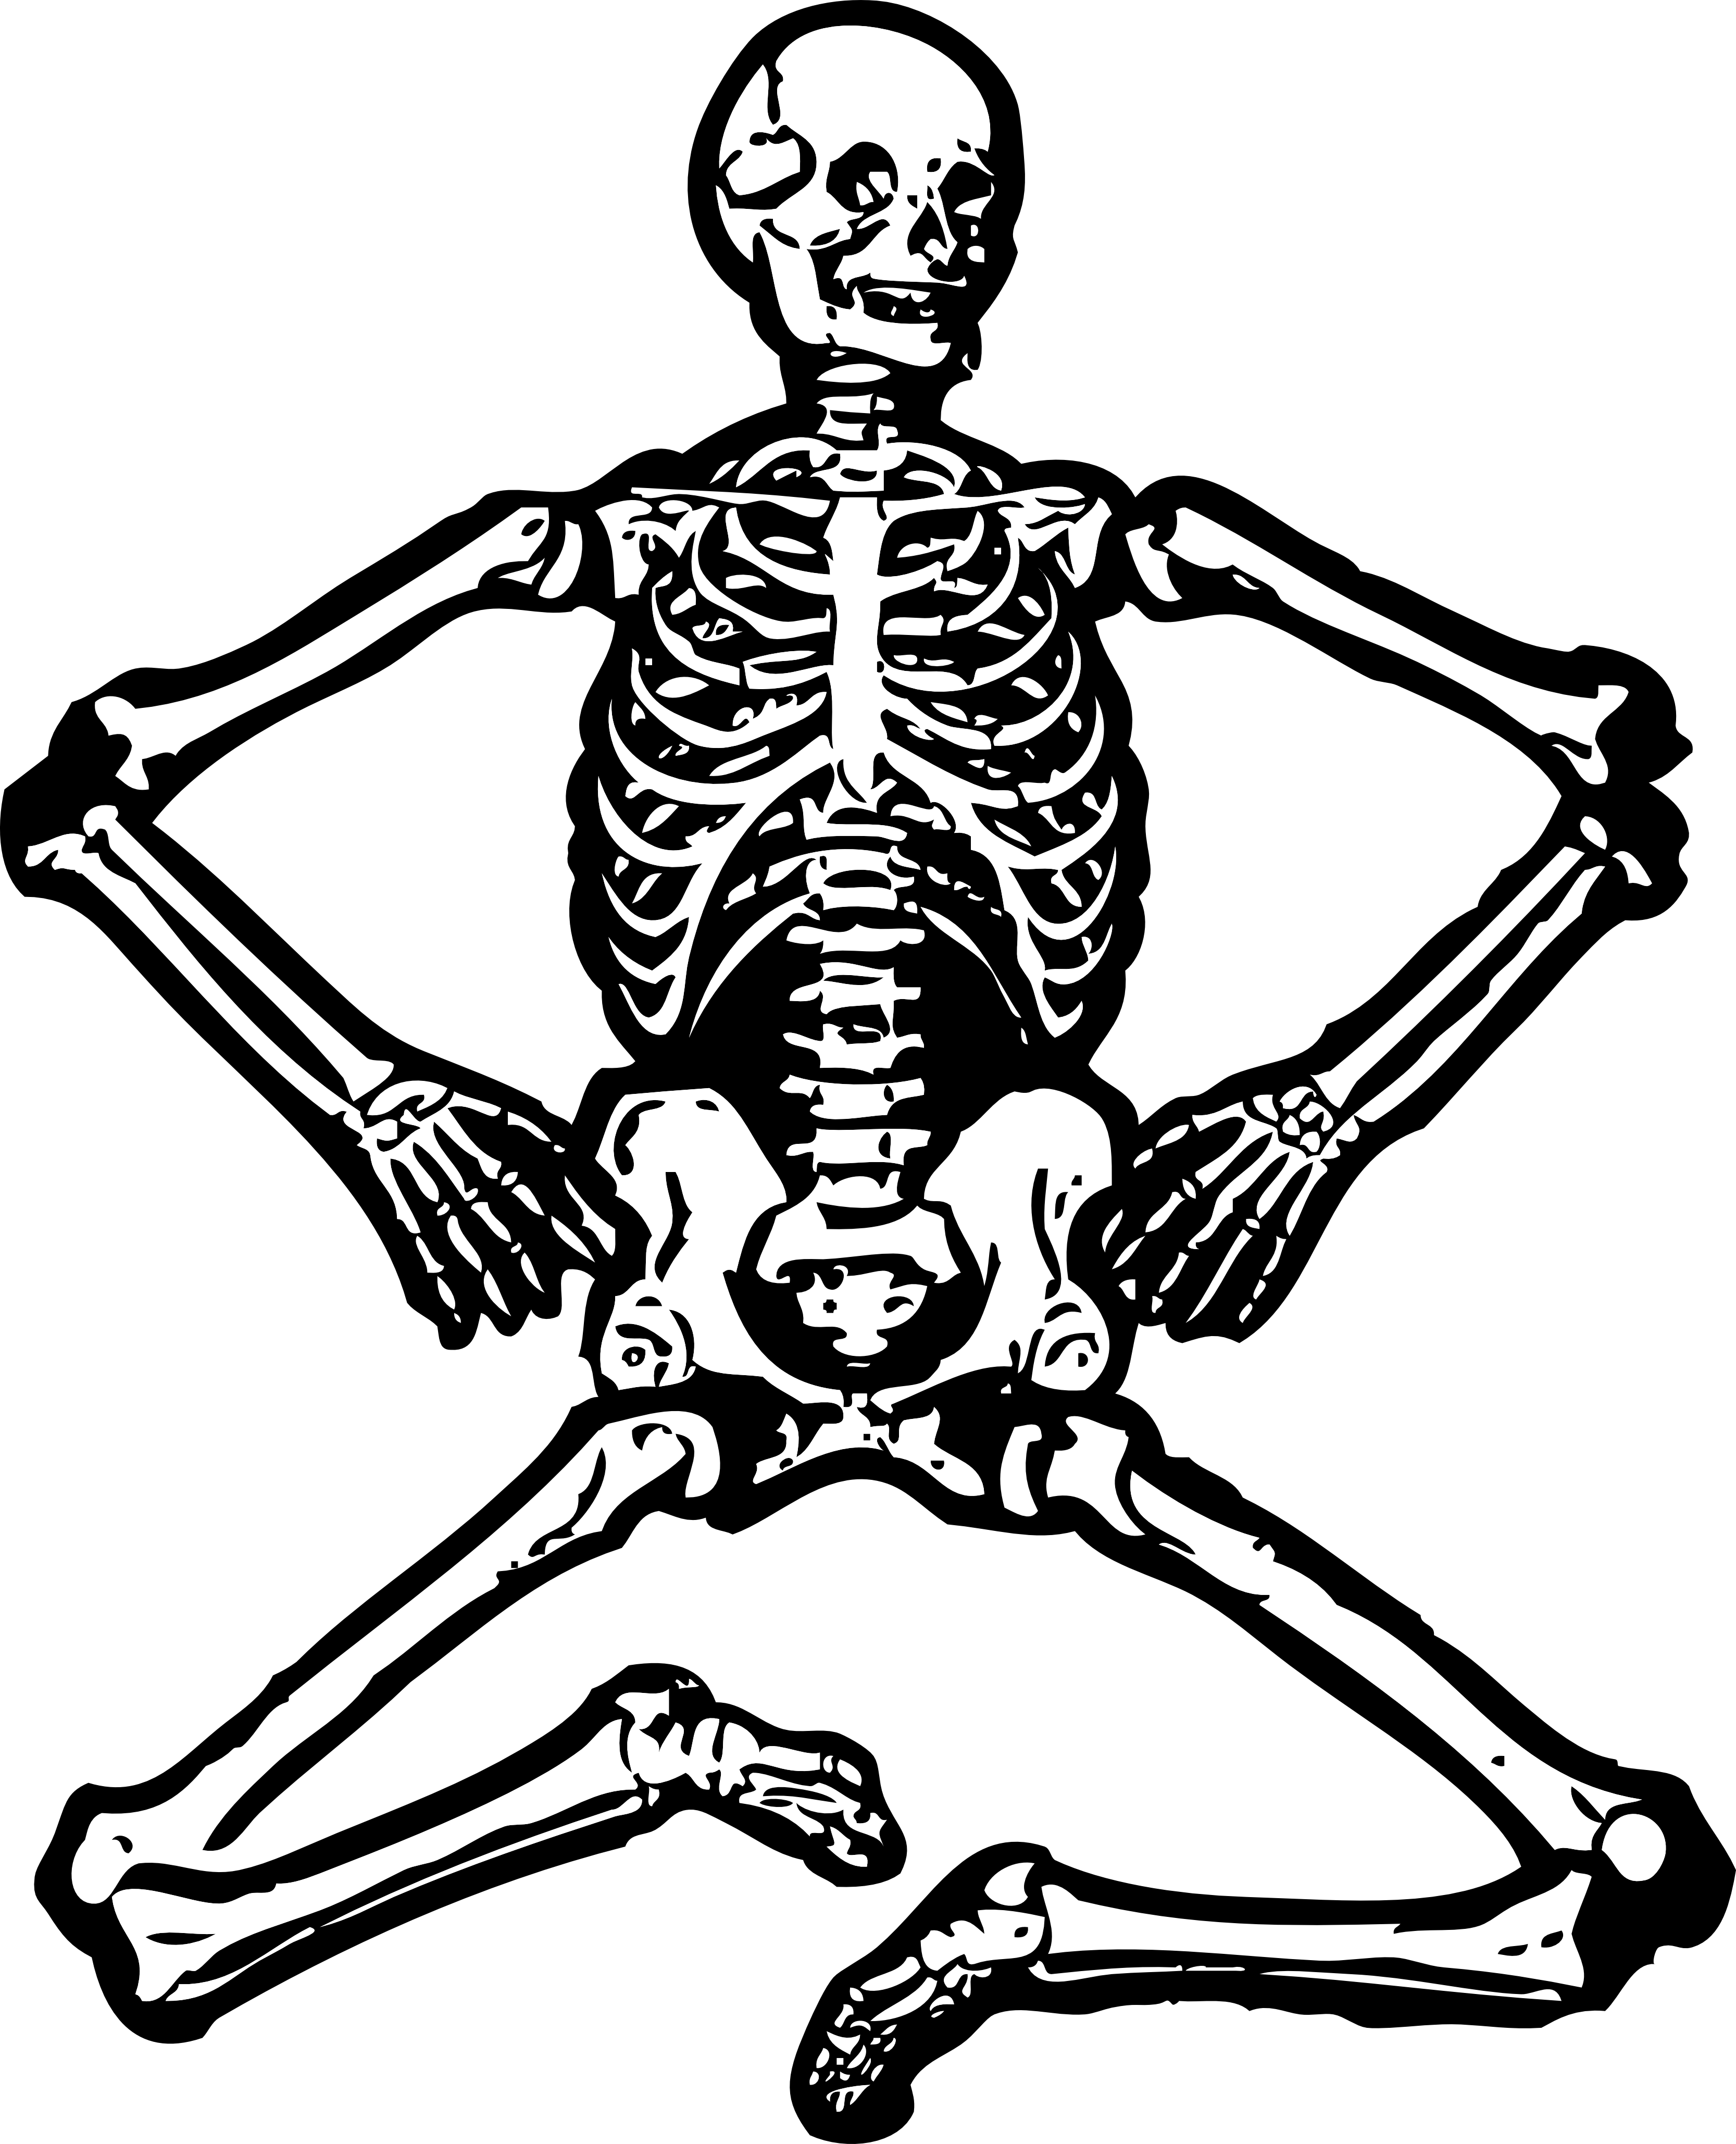 Free Skeleton Clipart Black And White, Download Free Clip.